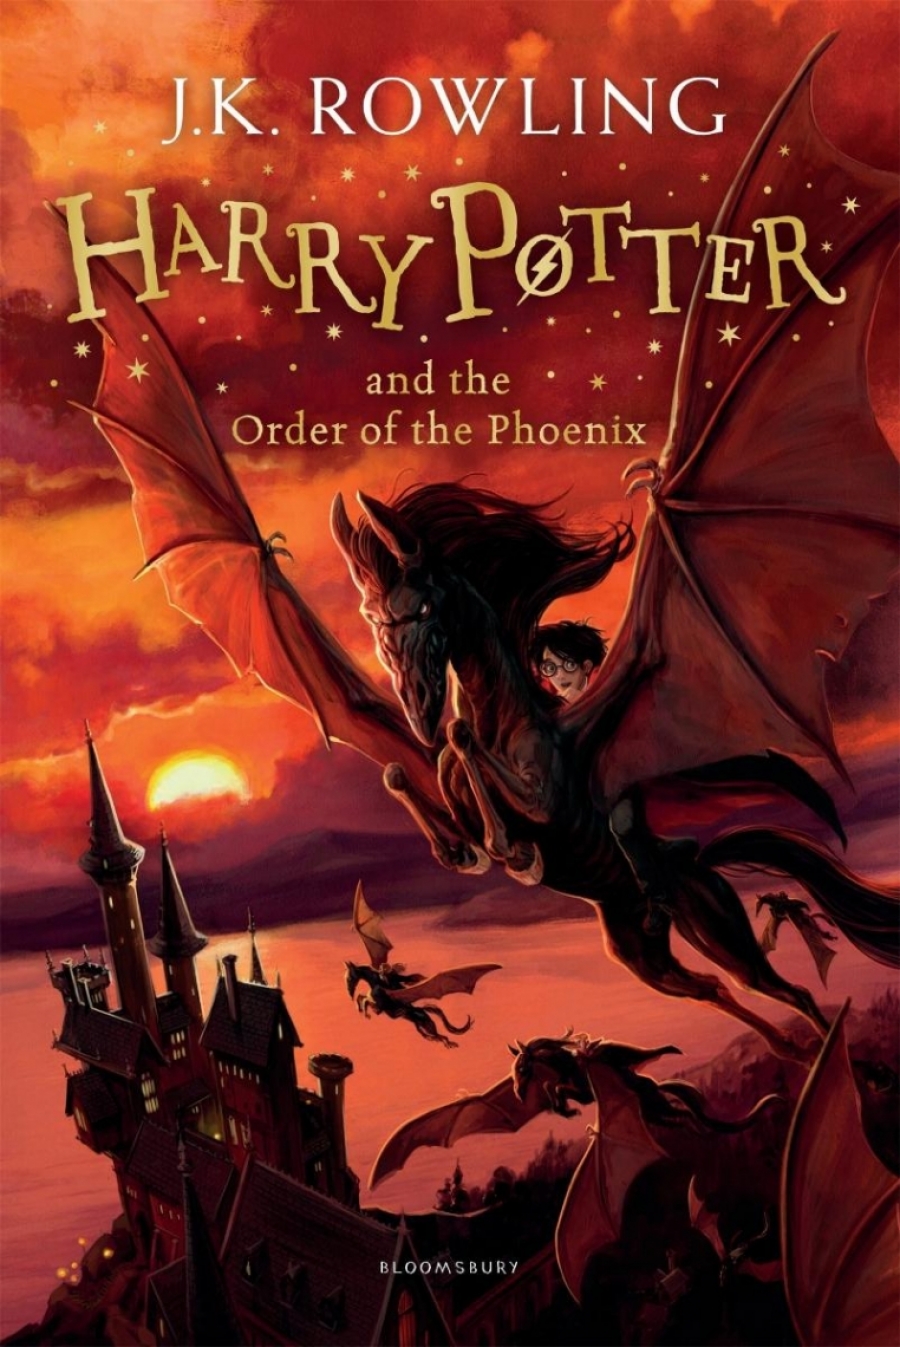 J. K. Rowling Harry Potter and the Order of the Phoenix (Book 5) - Hardcover 